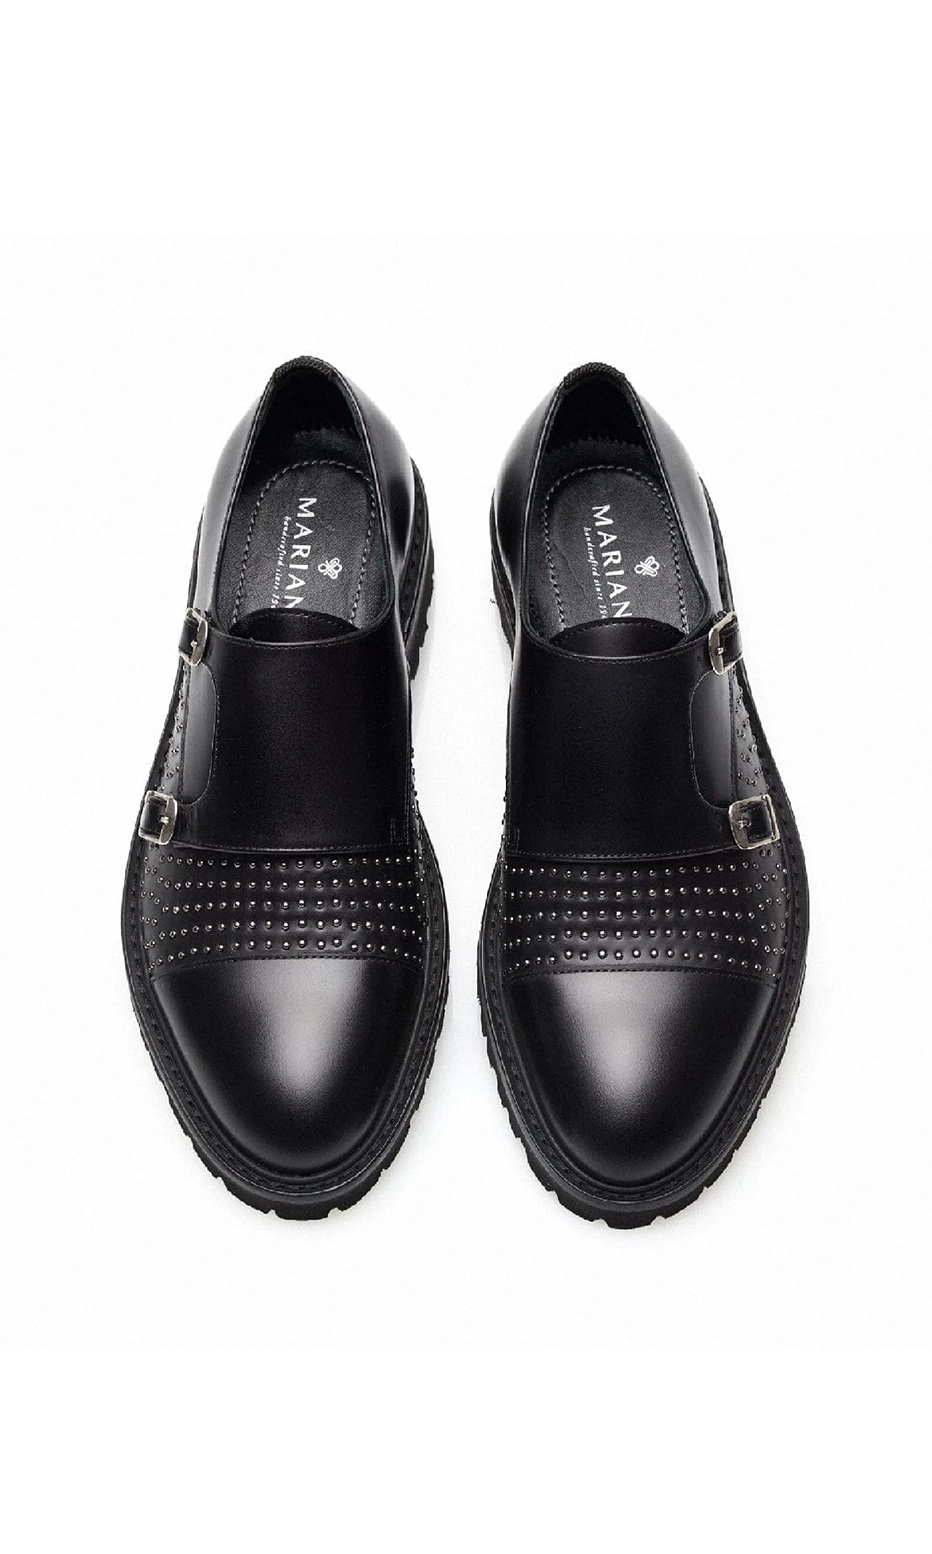 black monk shoes mariano